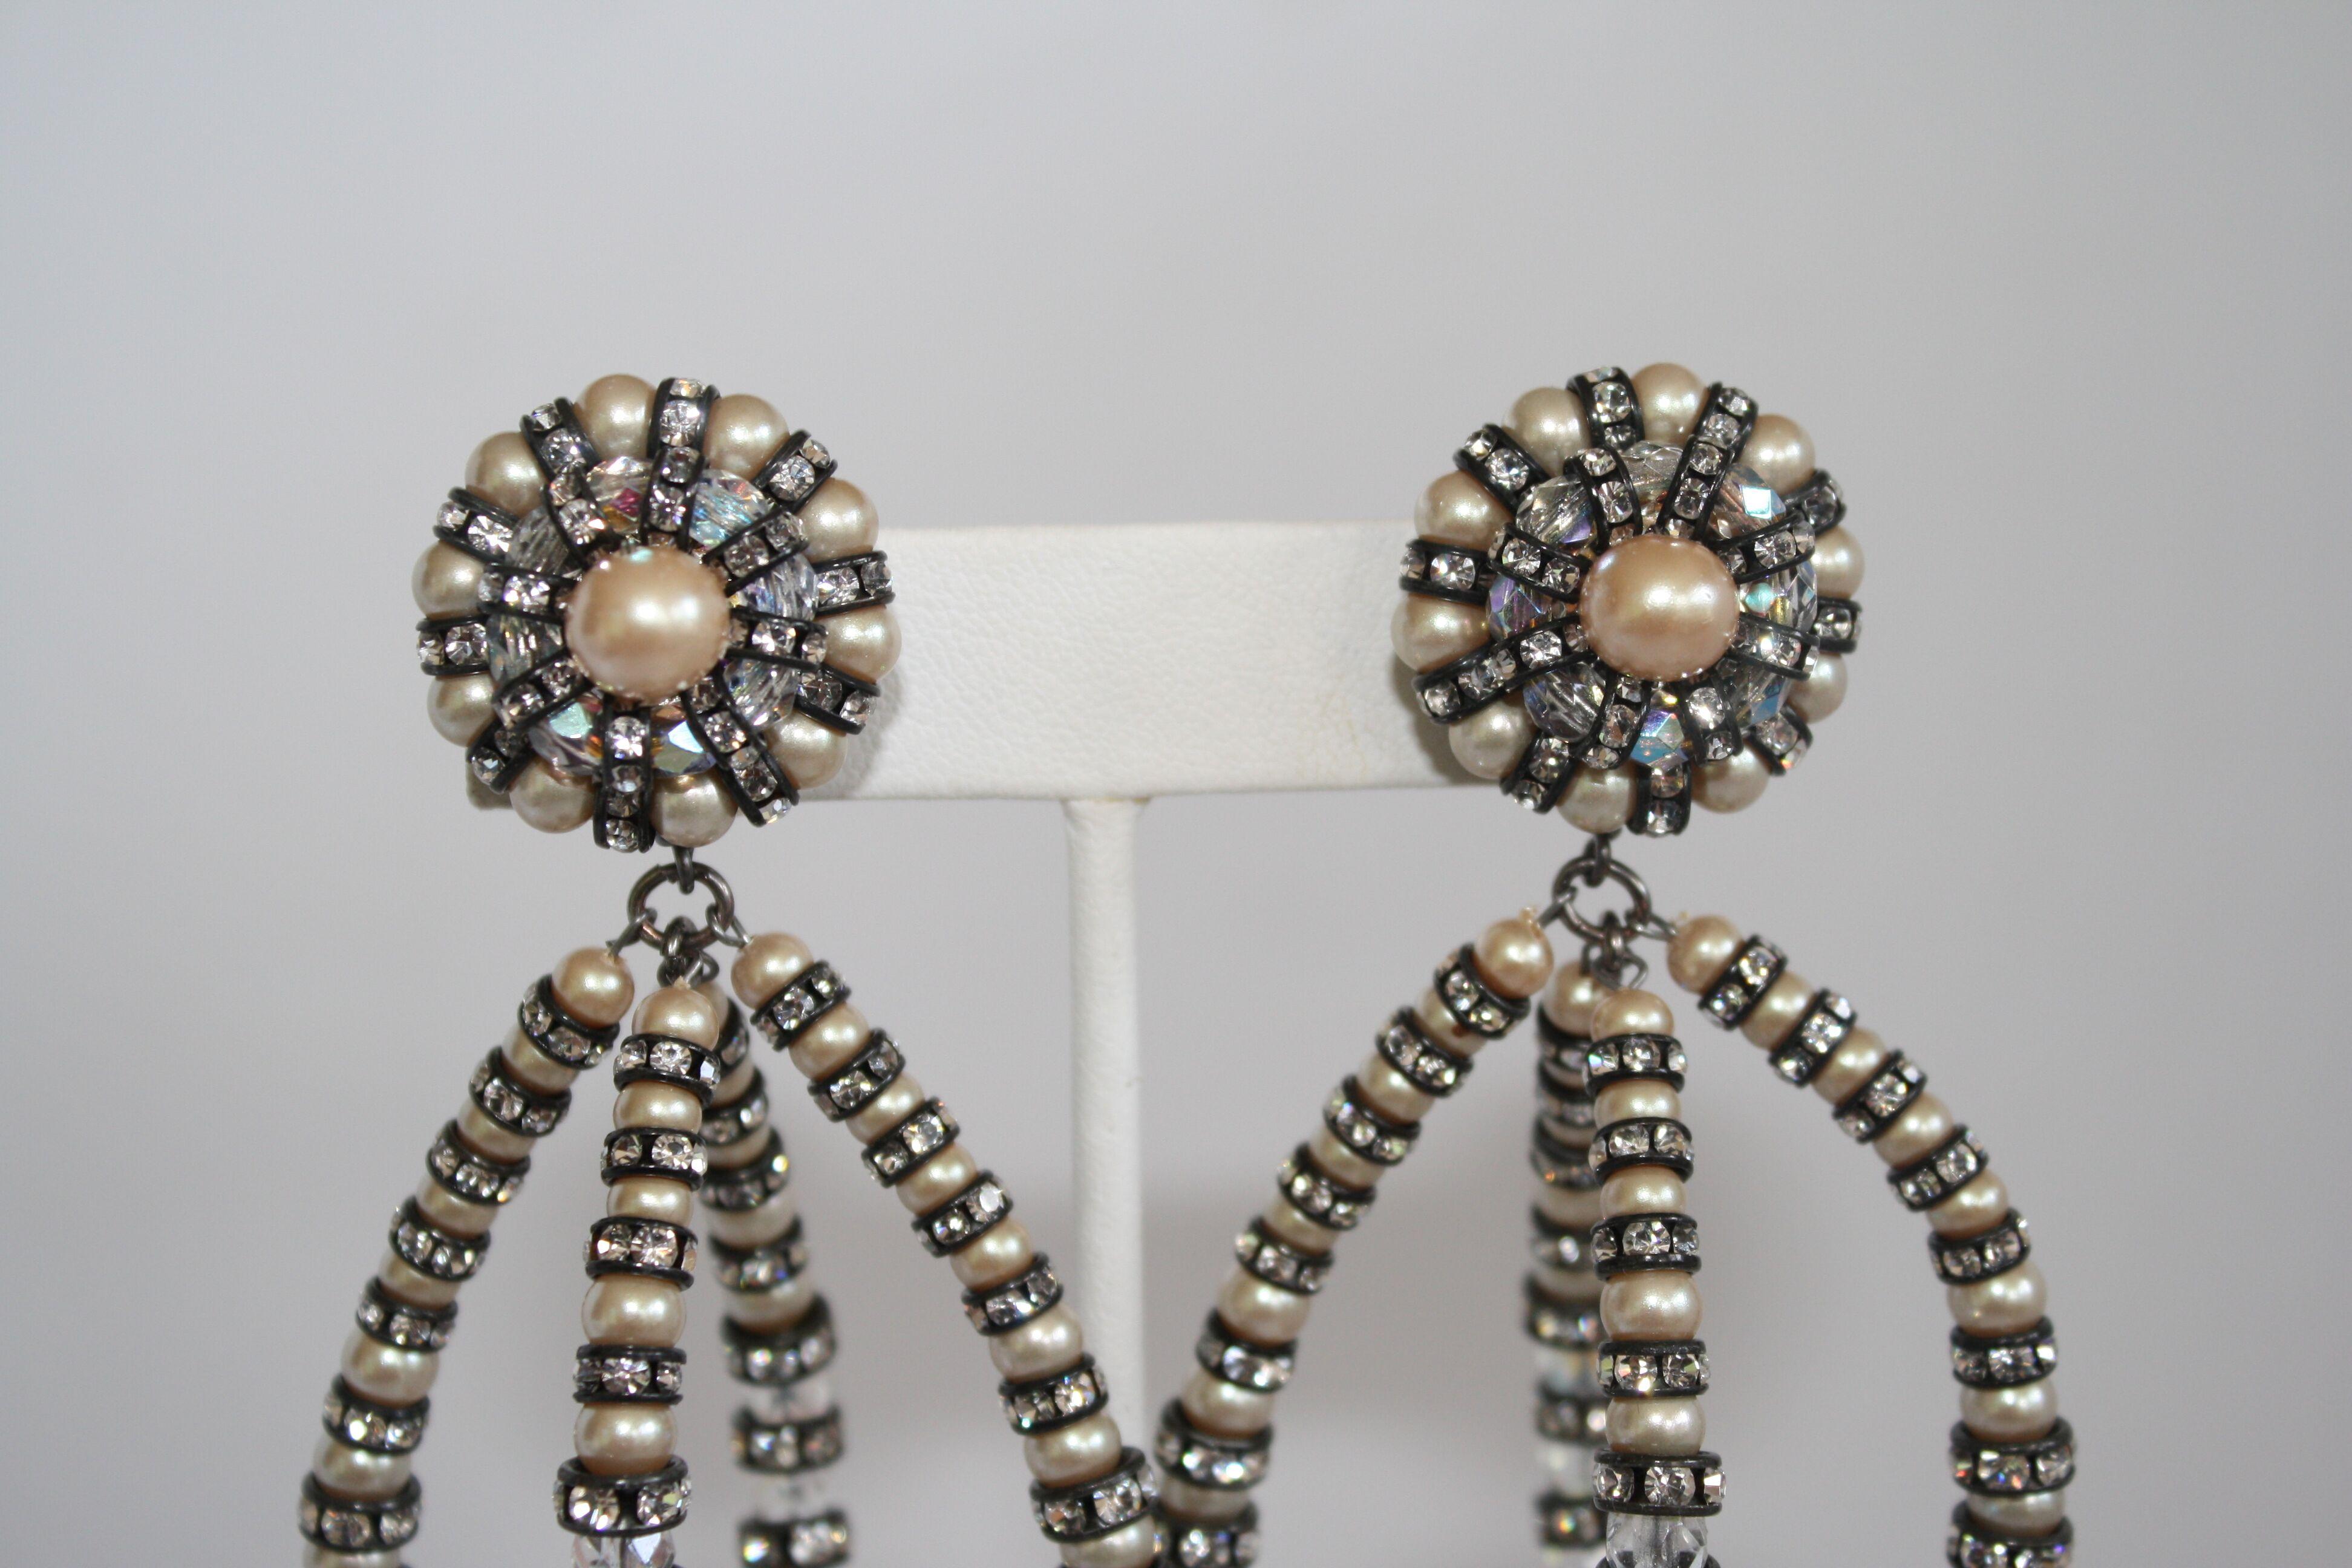 Iconic earring style from famed jewelry design house Francoise Montague. Made with glass pearl vintage beads and Swarovski Crystal rondelles on black metal.
